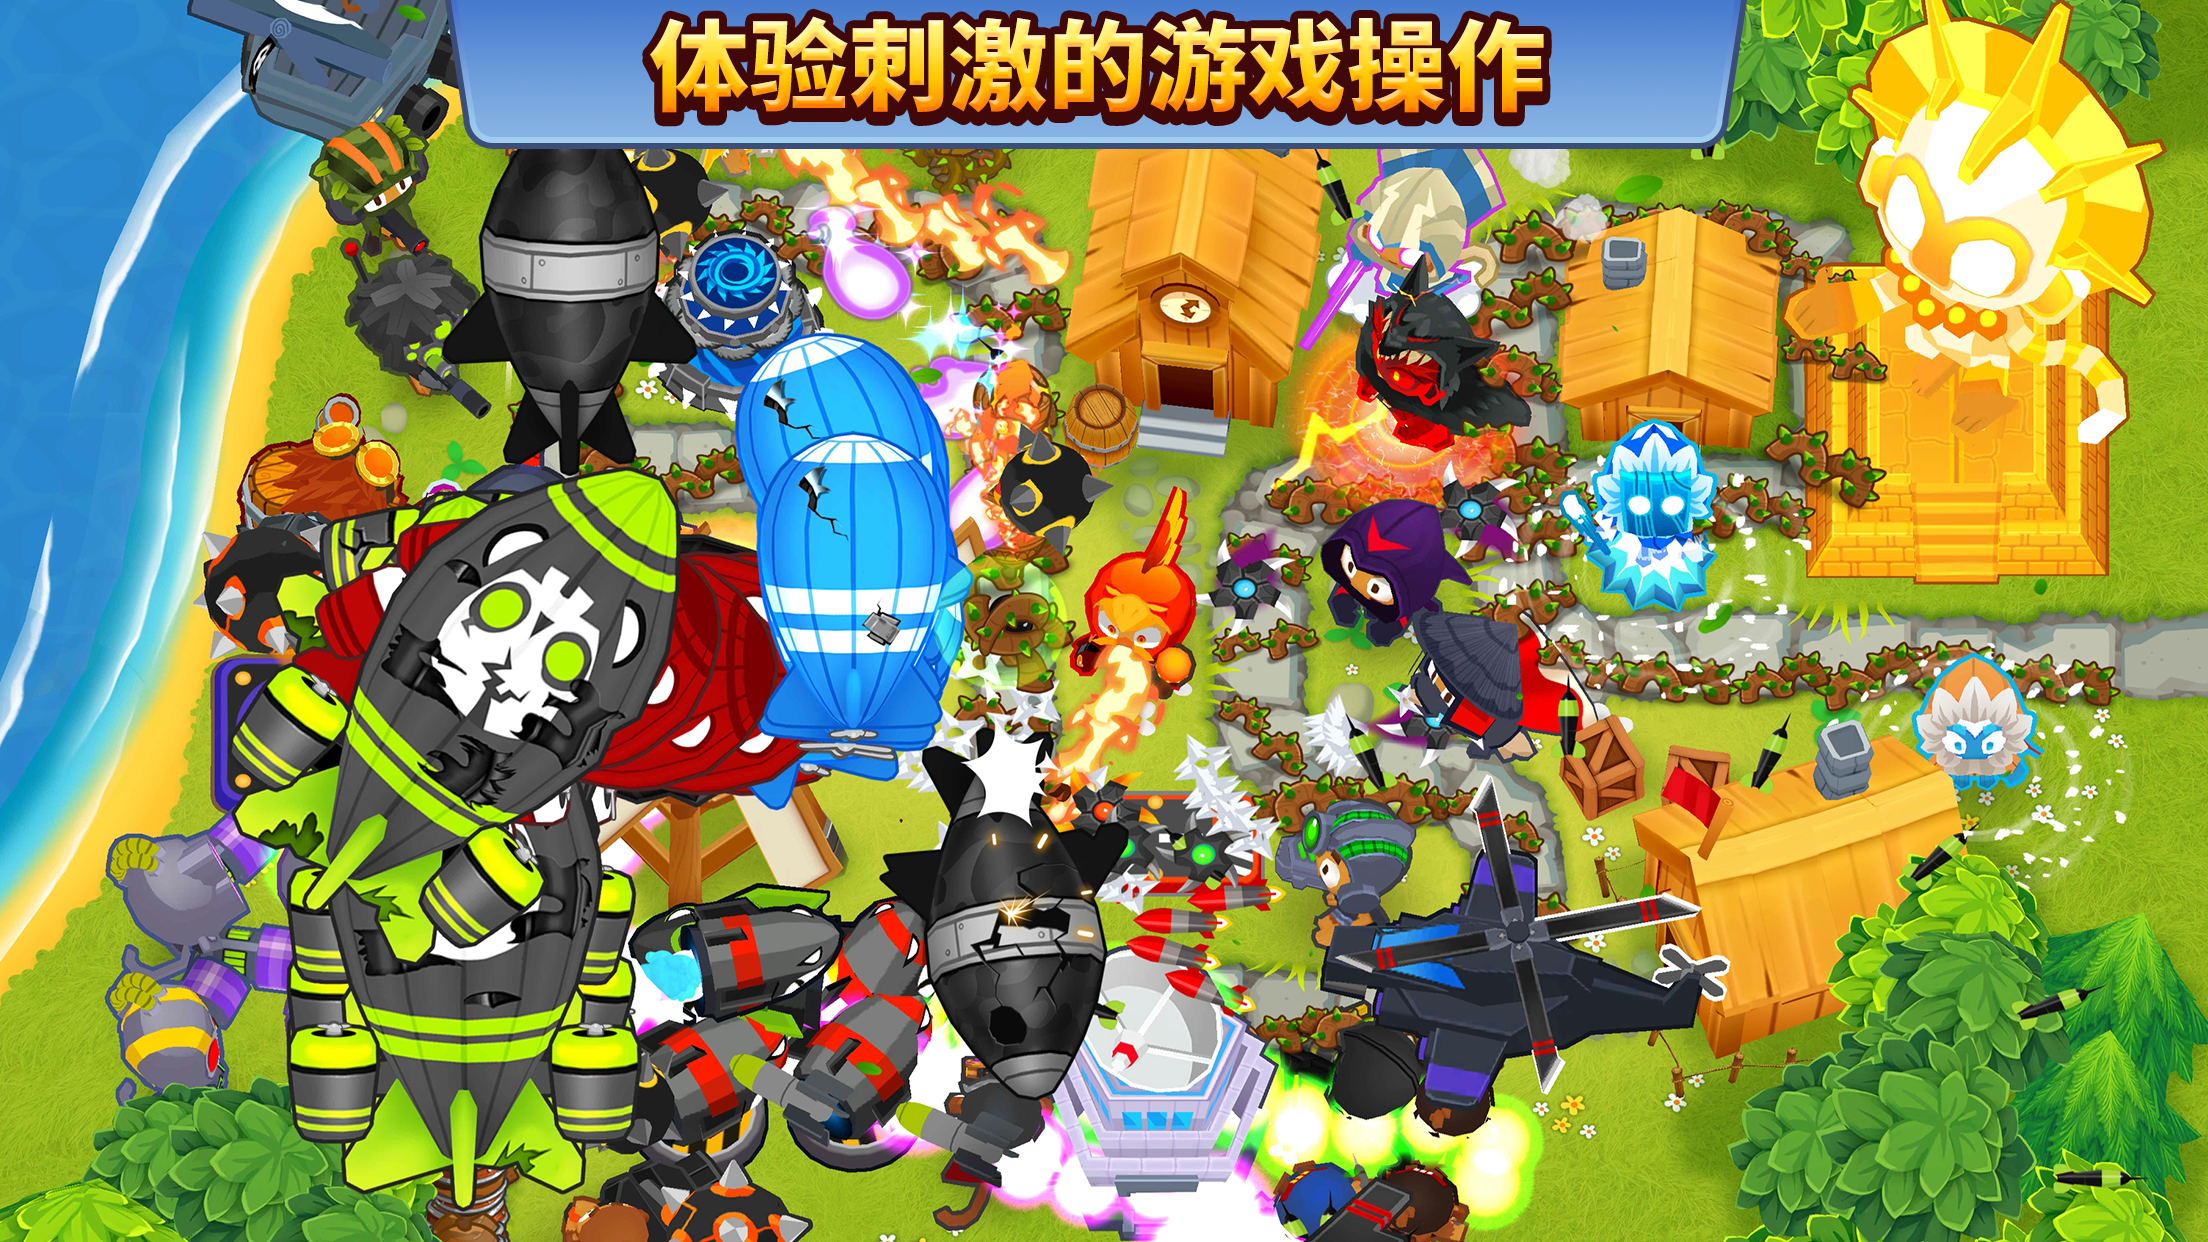 bloons tower defense 3 apk download